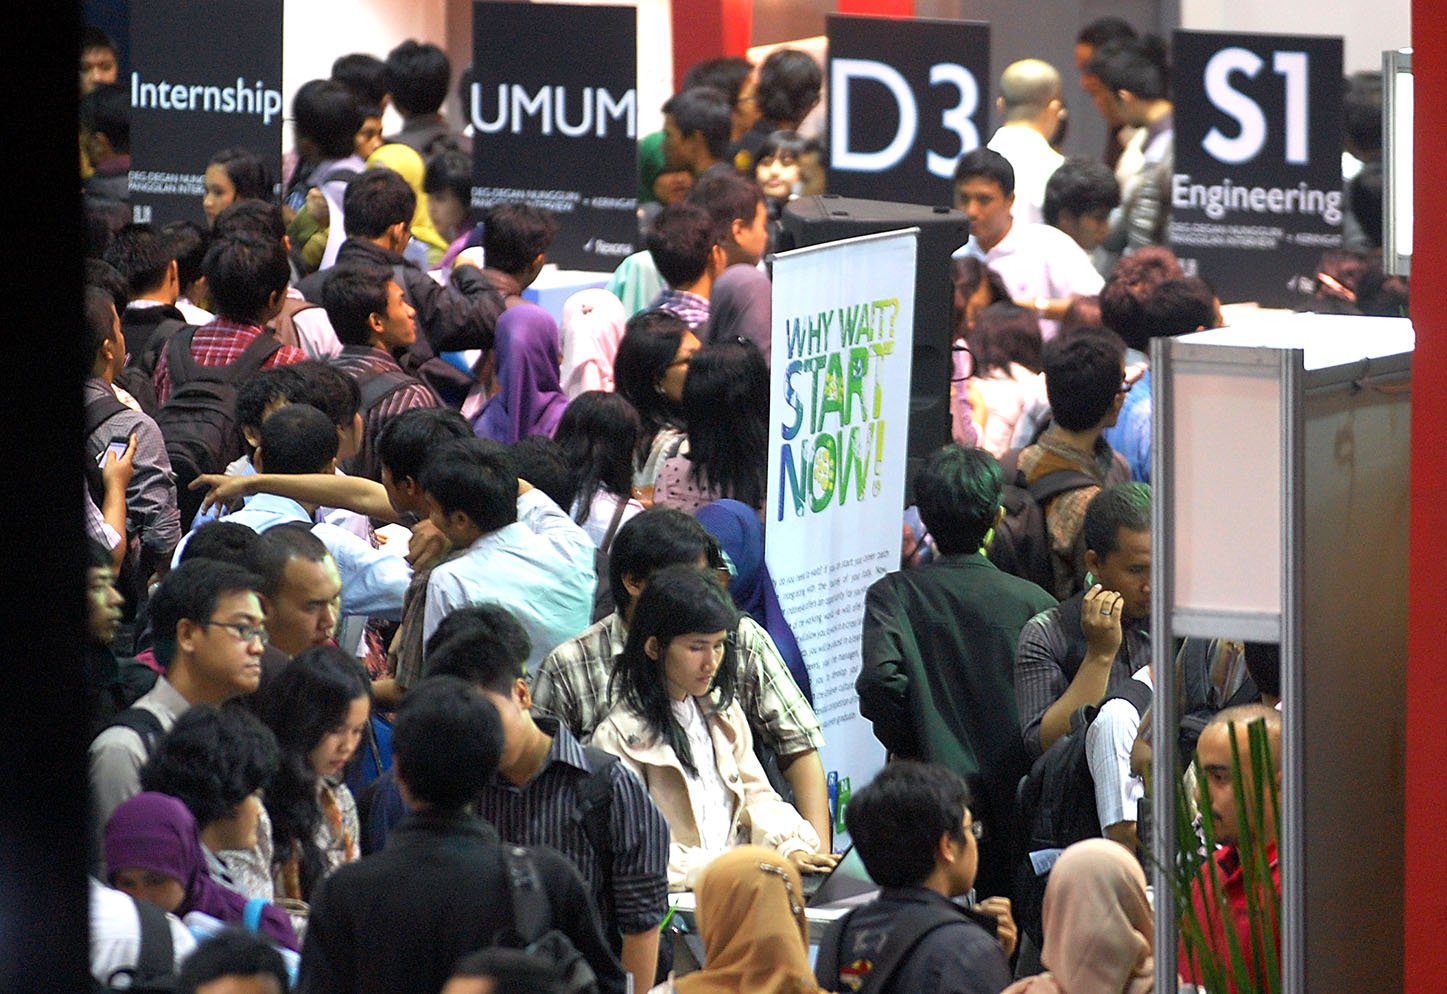  FOTO: ITB Integrated Career Days